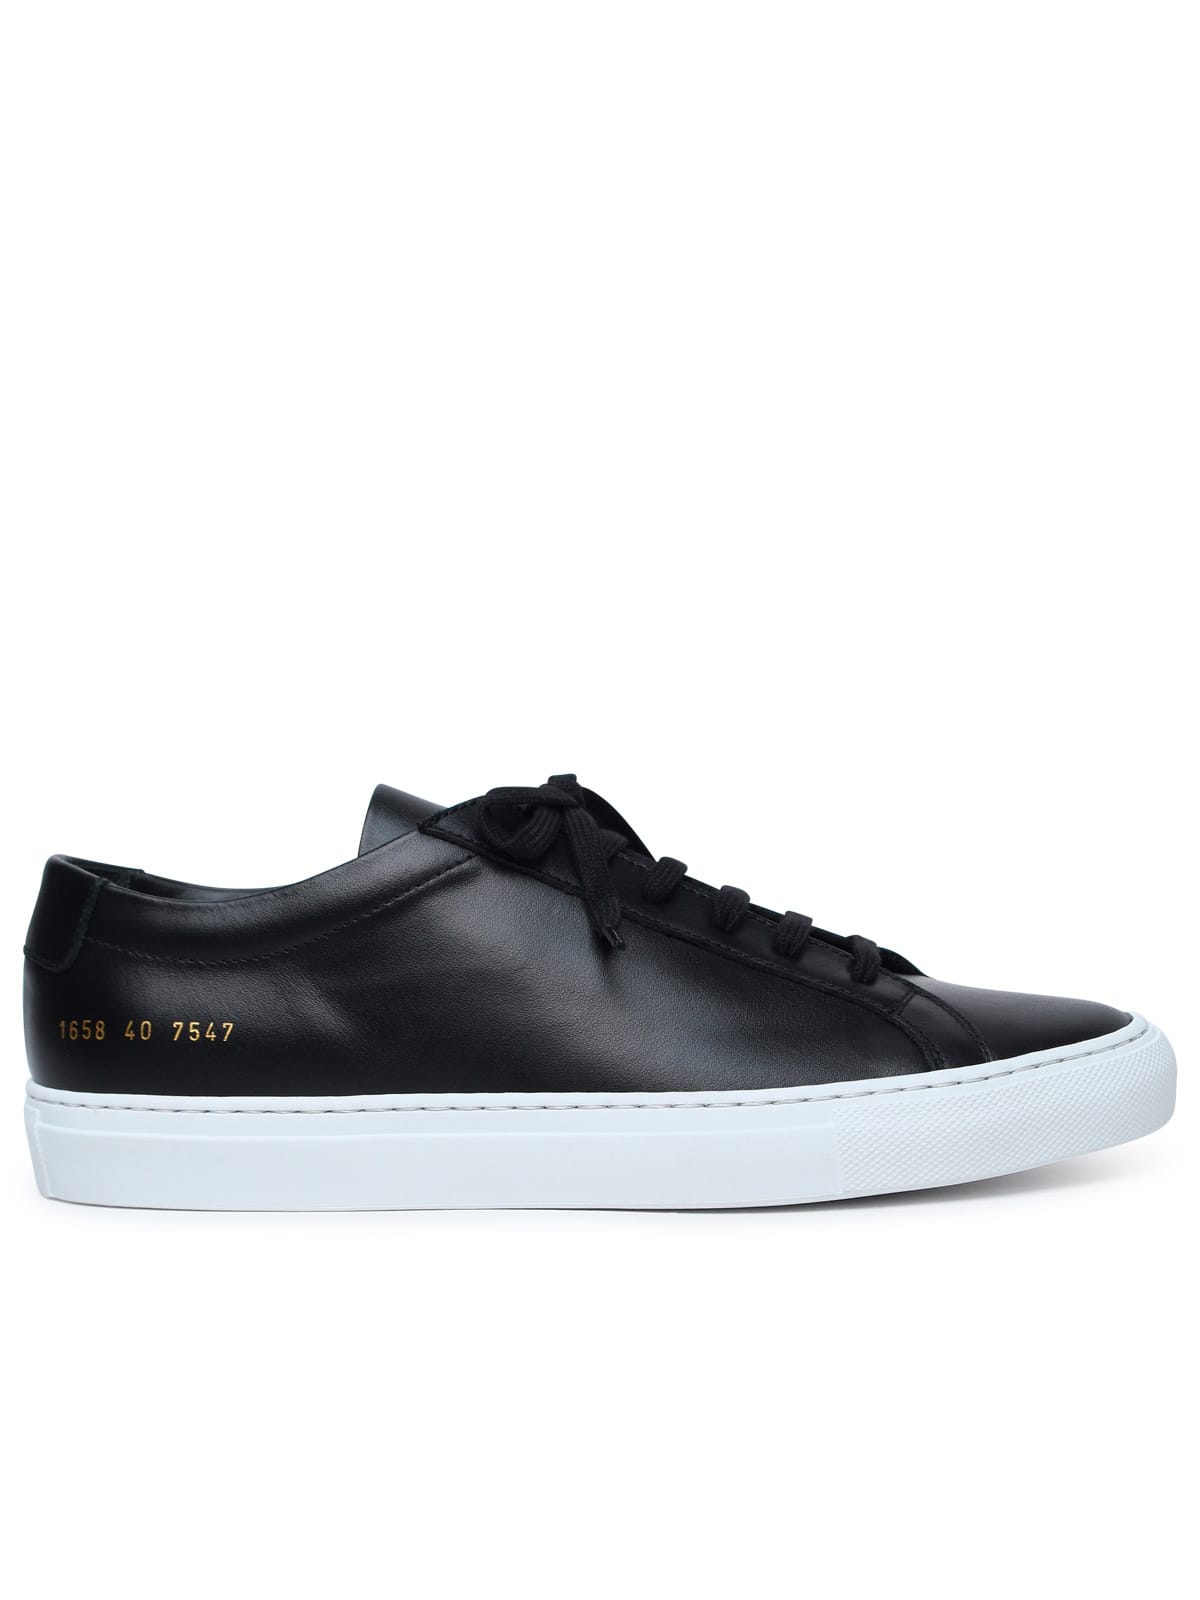 Common Projects Black Achilles Trainers